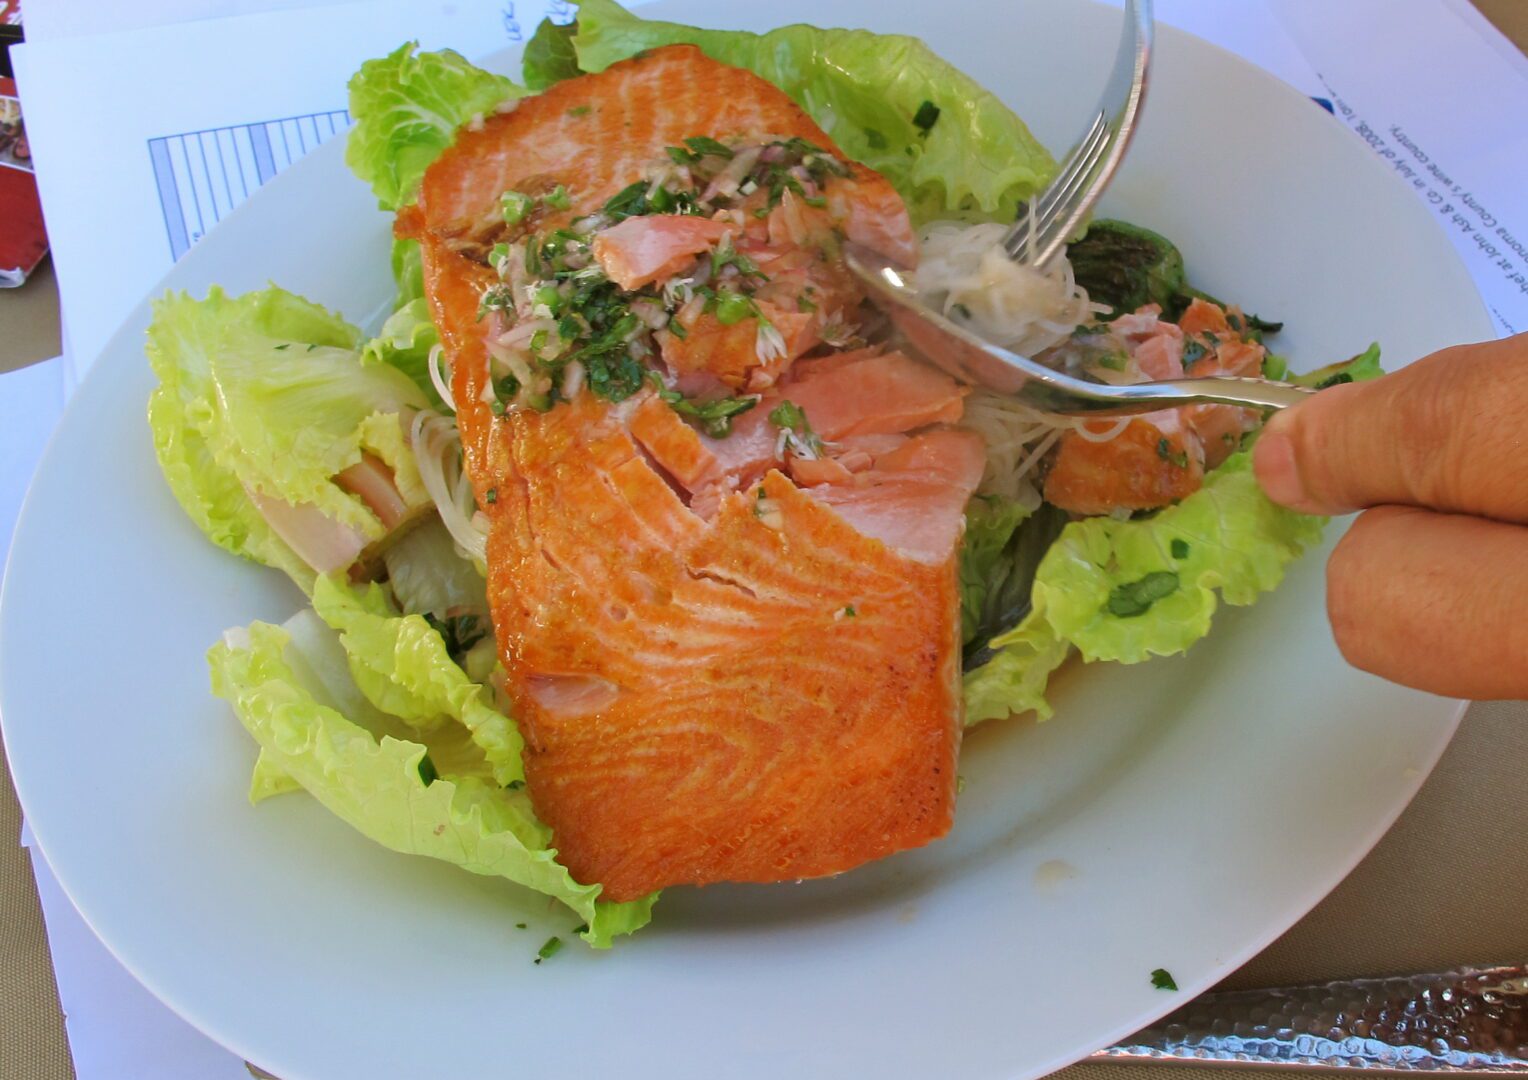 A person is holding a fork to a plate of salmon.